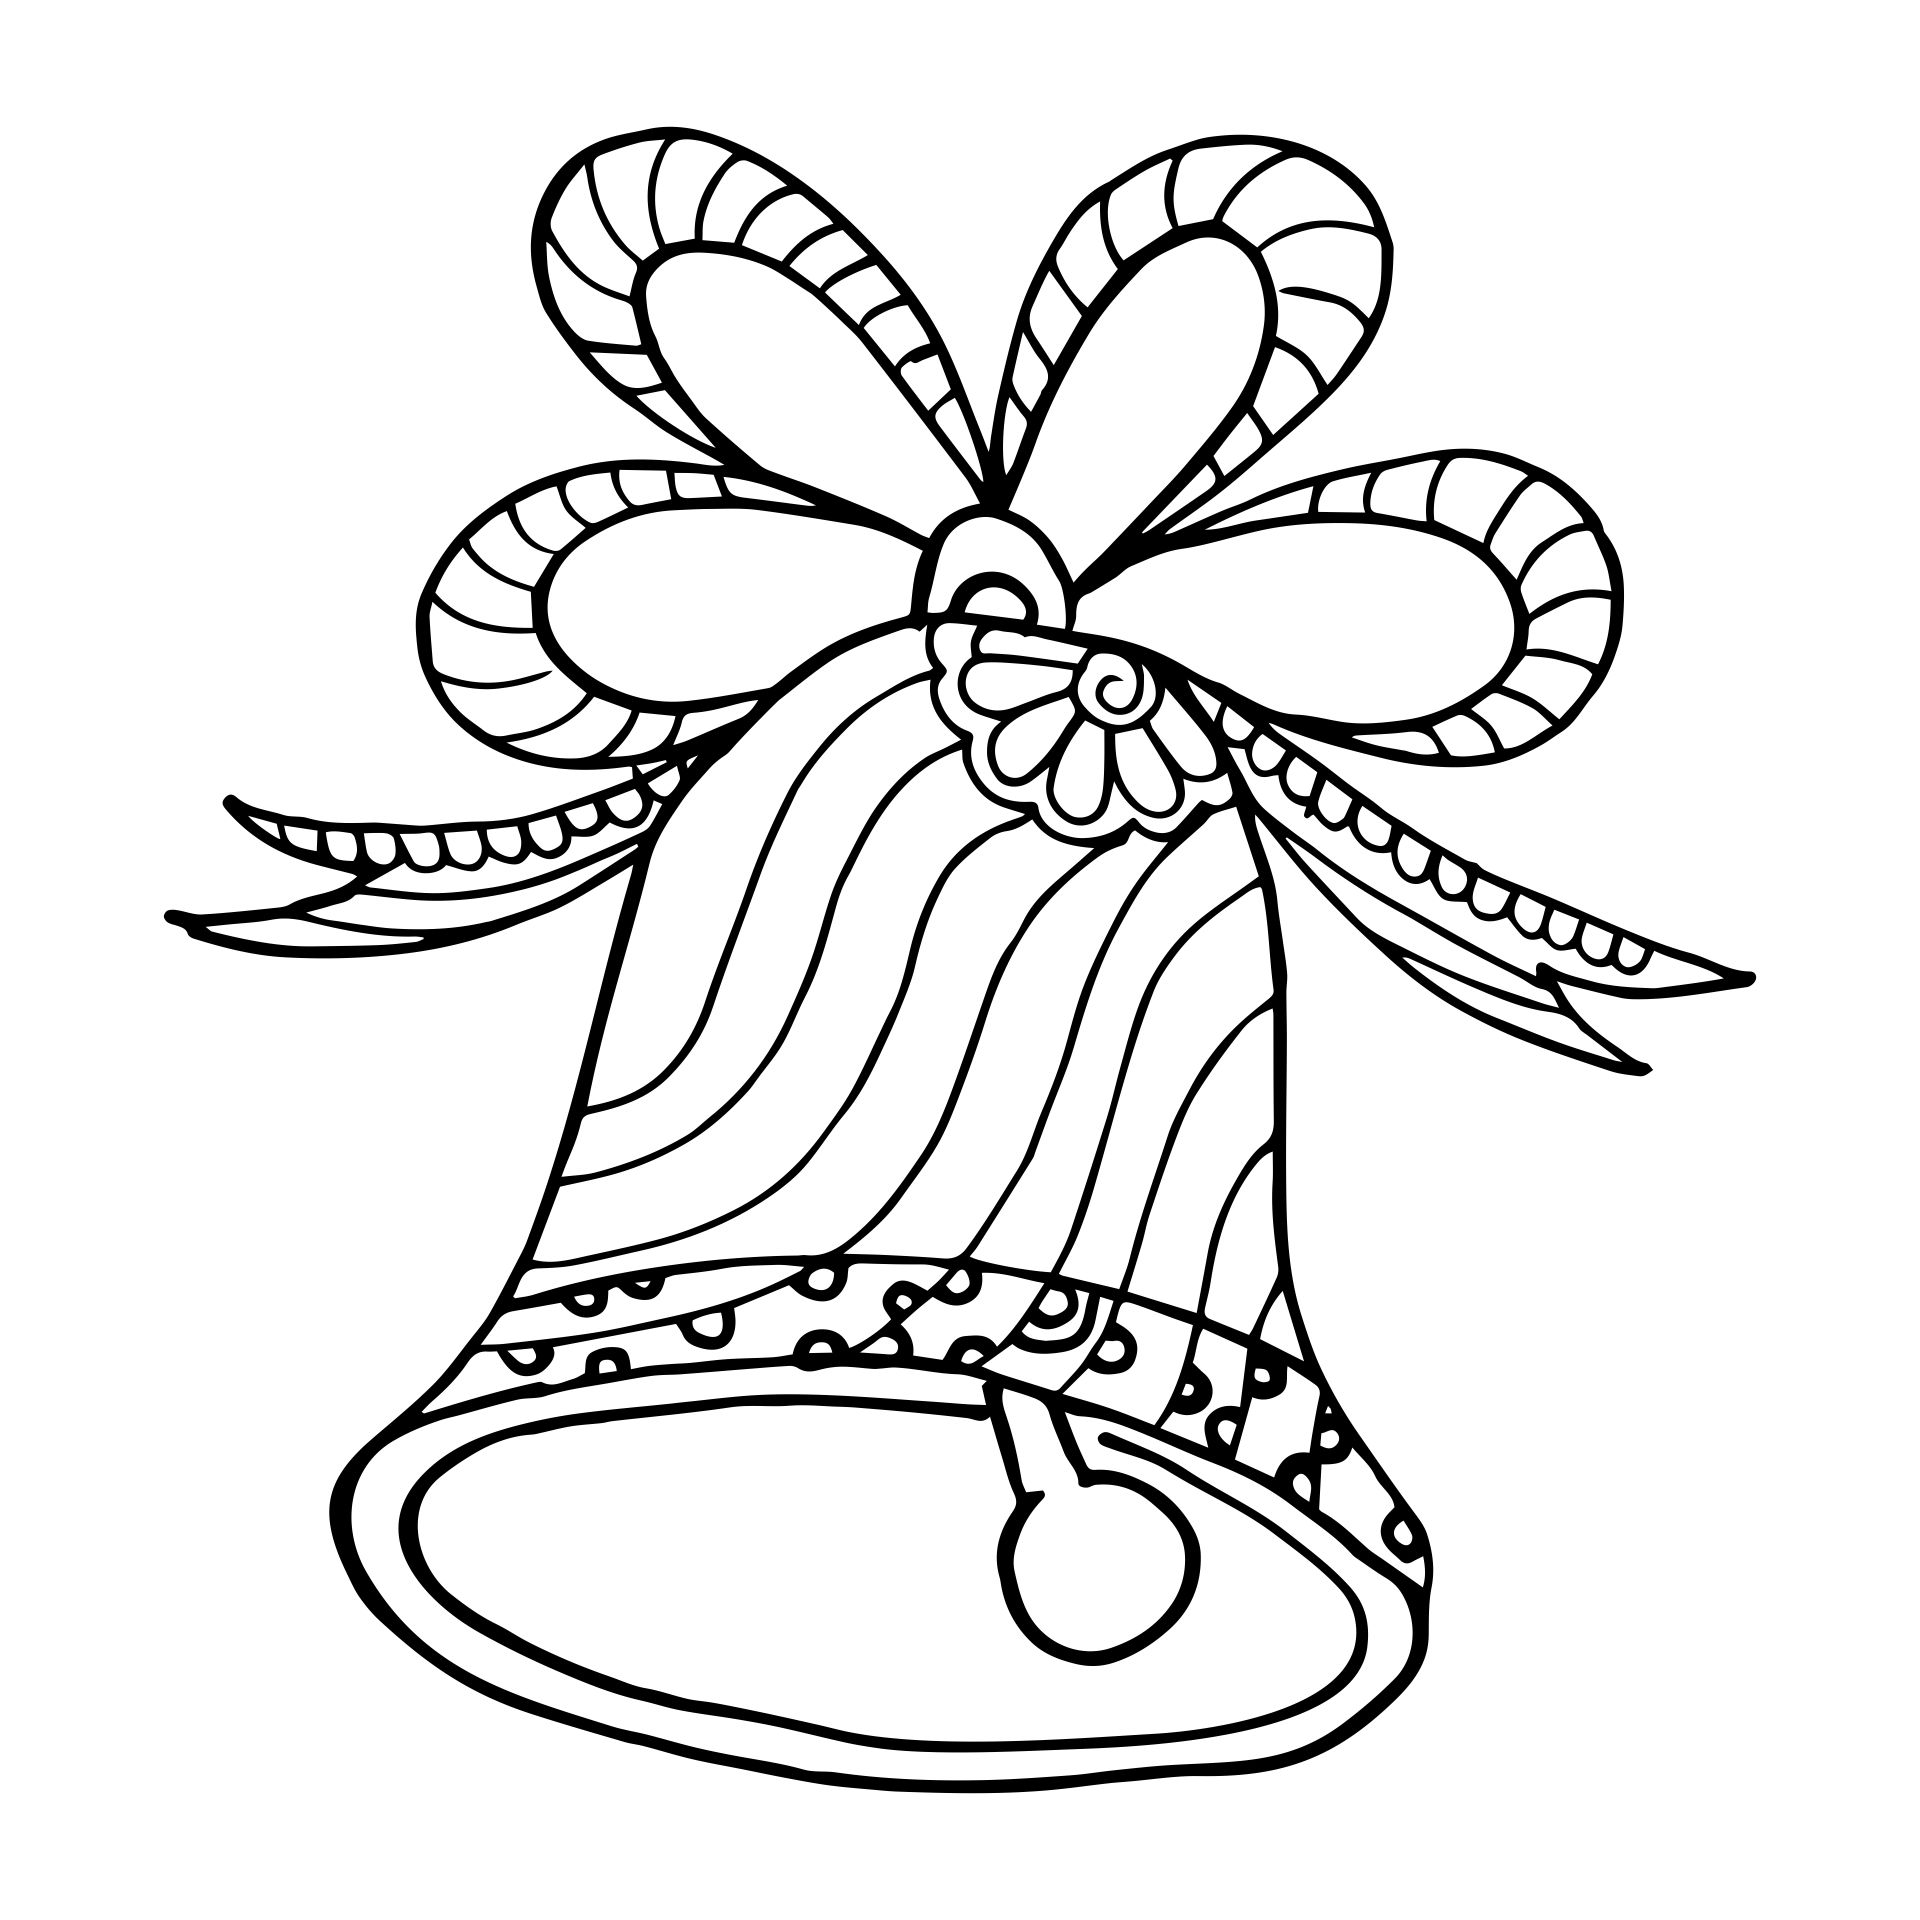 Easy To Print Adult Christmas Coloring Pages